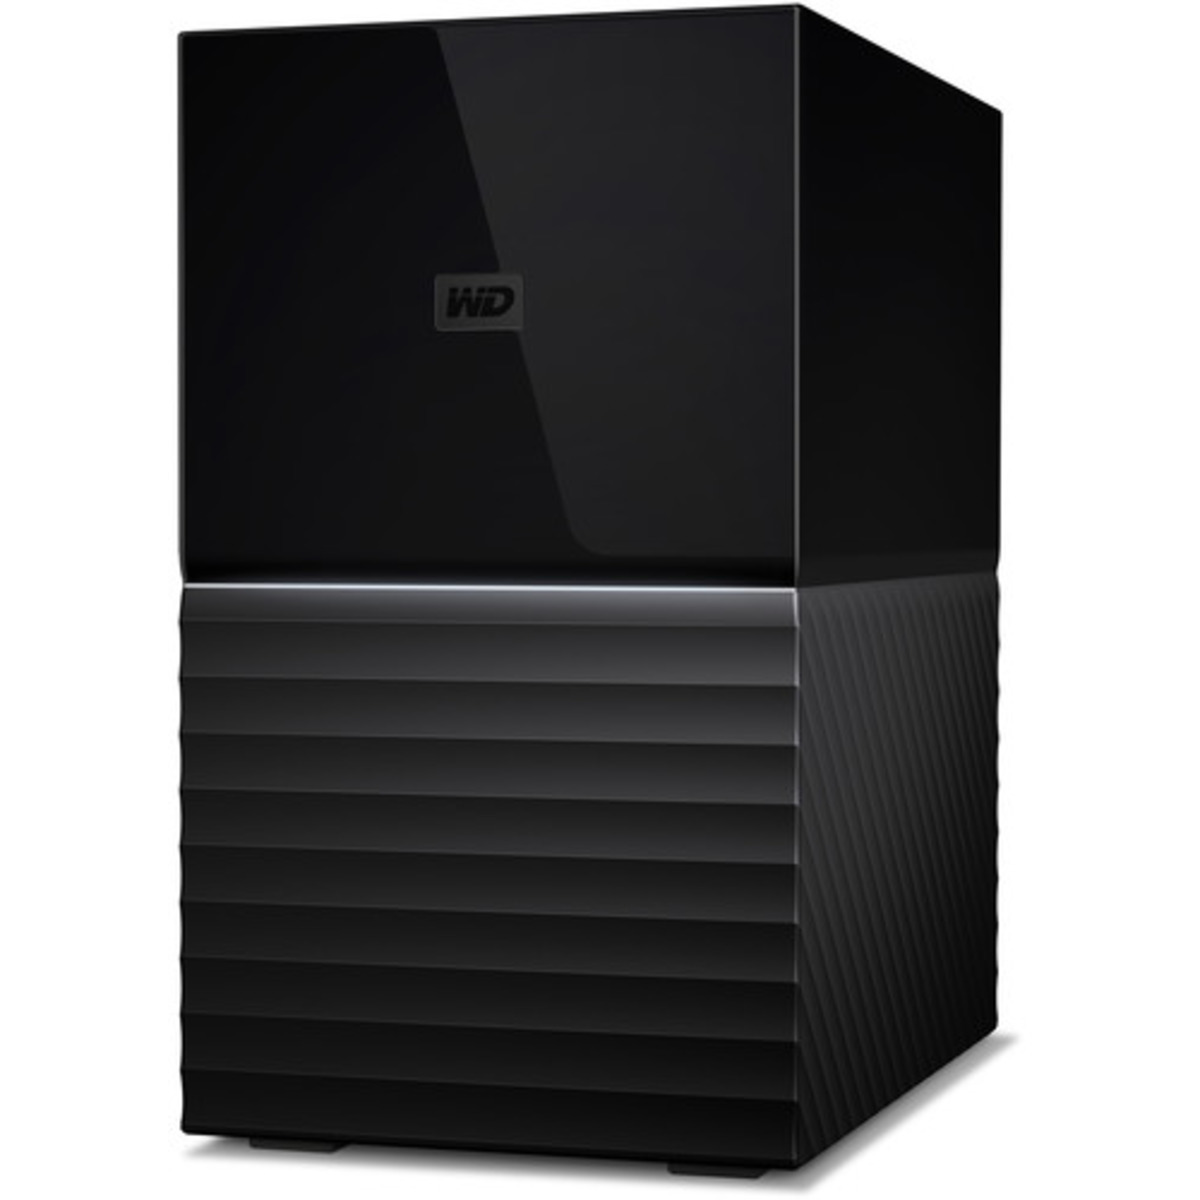 Western Digital My Book DUO Gen 2 Desktop 2-Bay Personal / Basic Home / Small Office DAS - Direct Attached Storage Device Burn-In Tested Configurations - ON SALE My Book DUO Gen 2